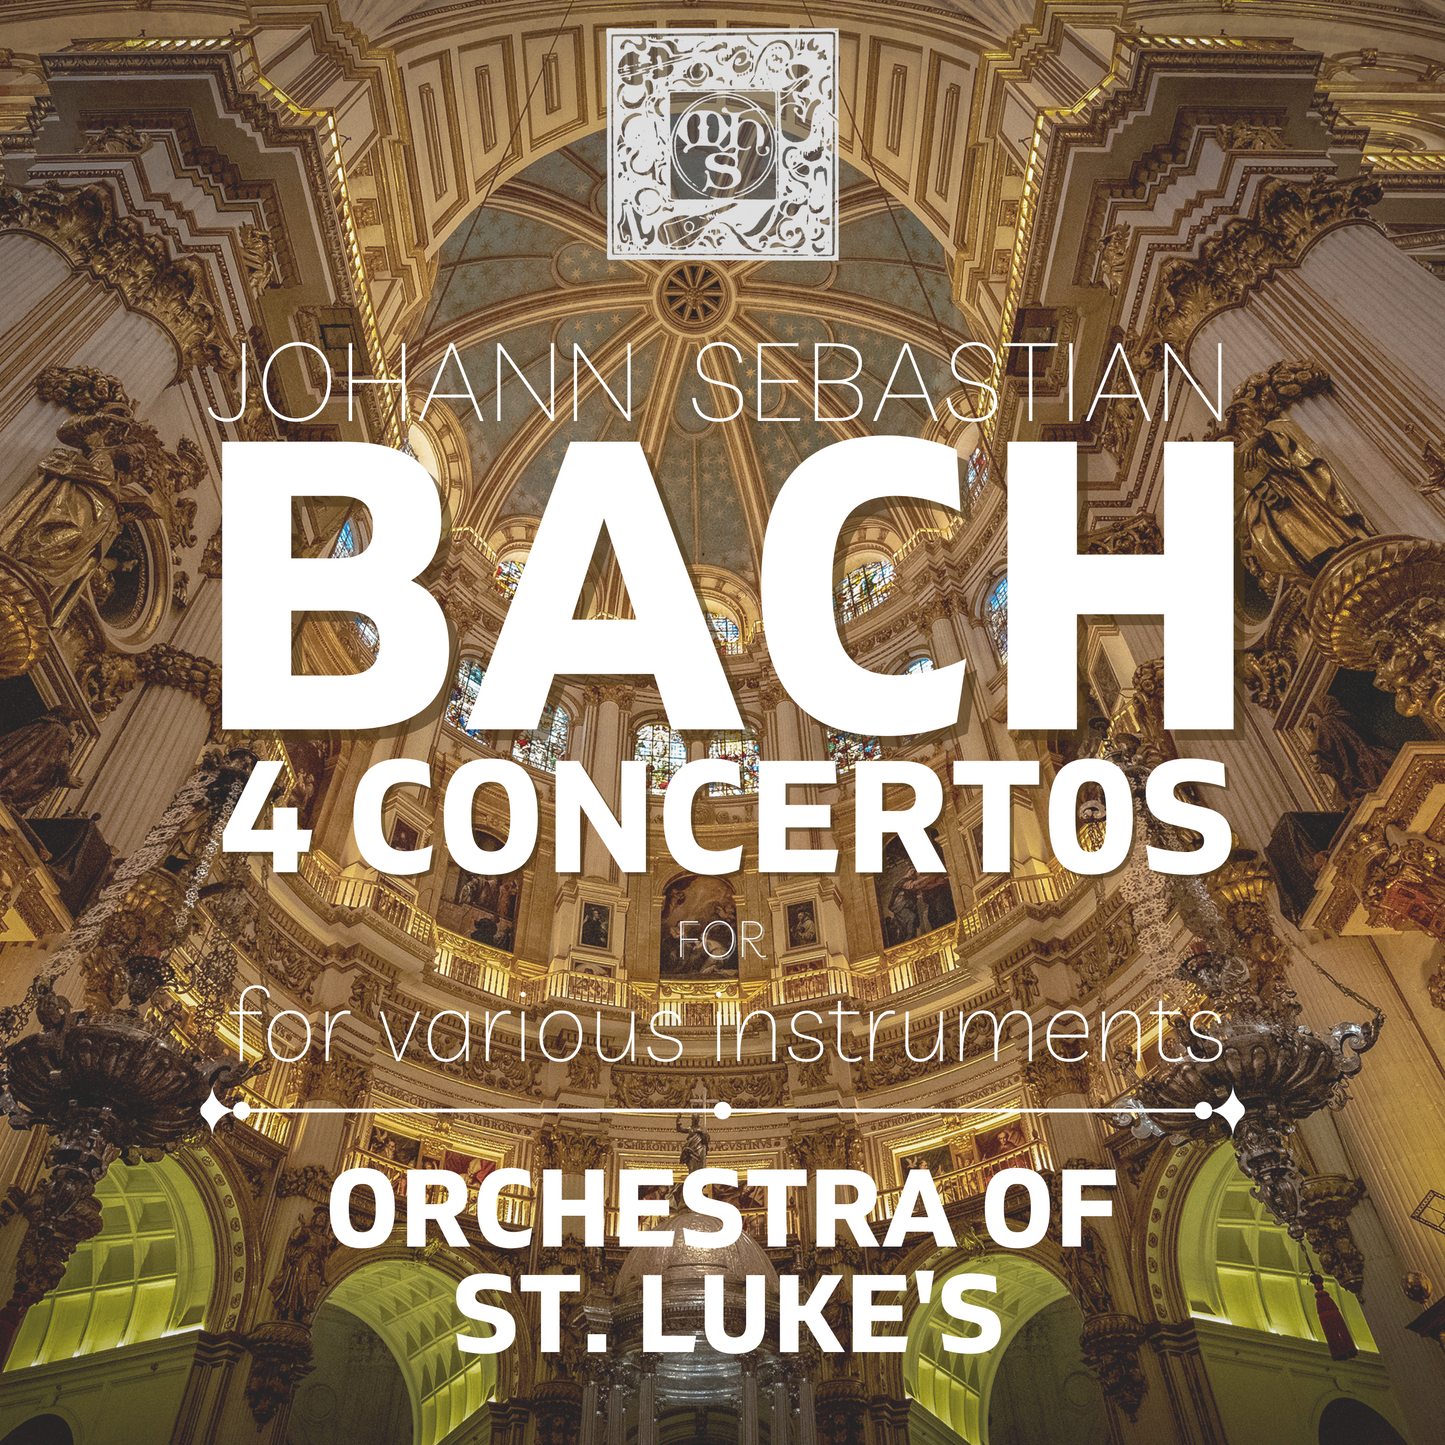 BACH: 4 Concerti for Various Instruments - Orchestra of St. Luke's (DIGITAL DOWNLOAD)